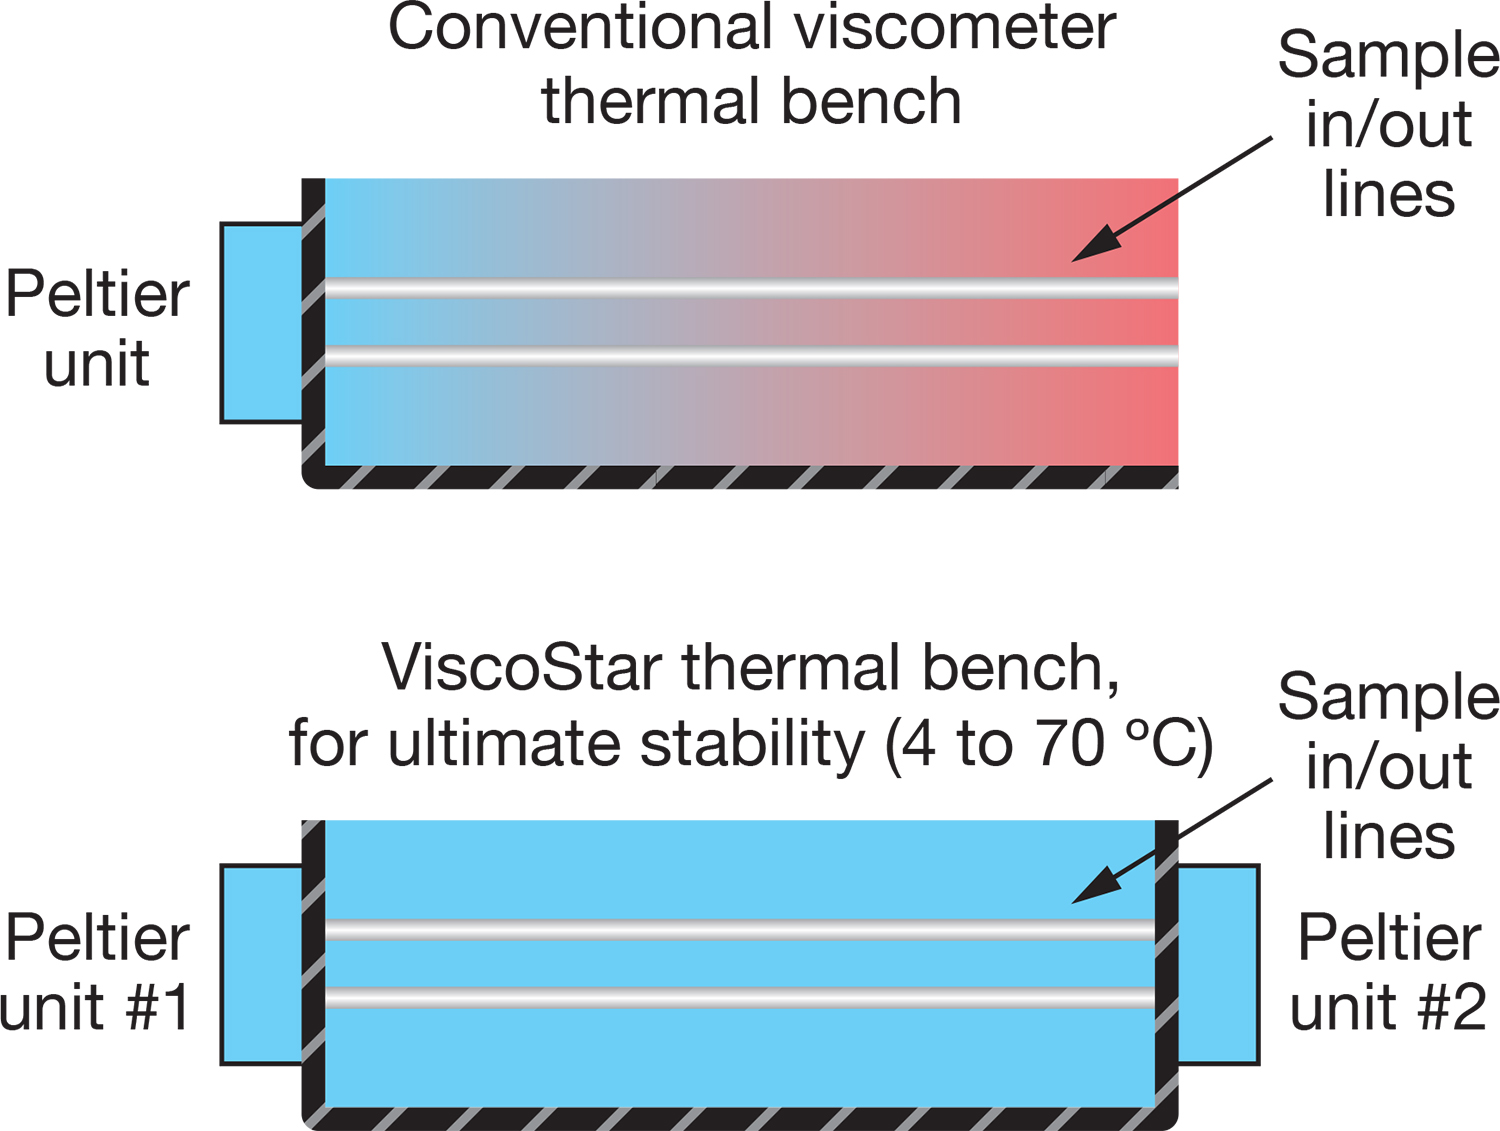 Dual-Peltier thermal control of the ViscoStar